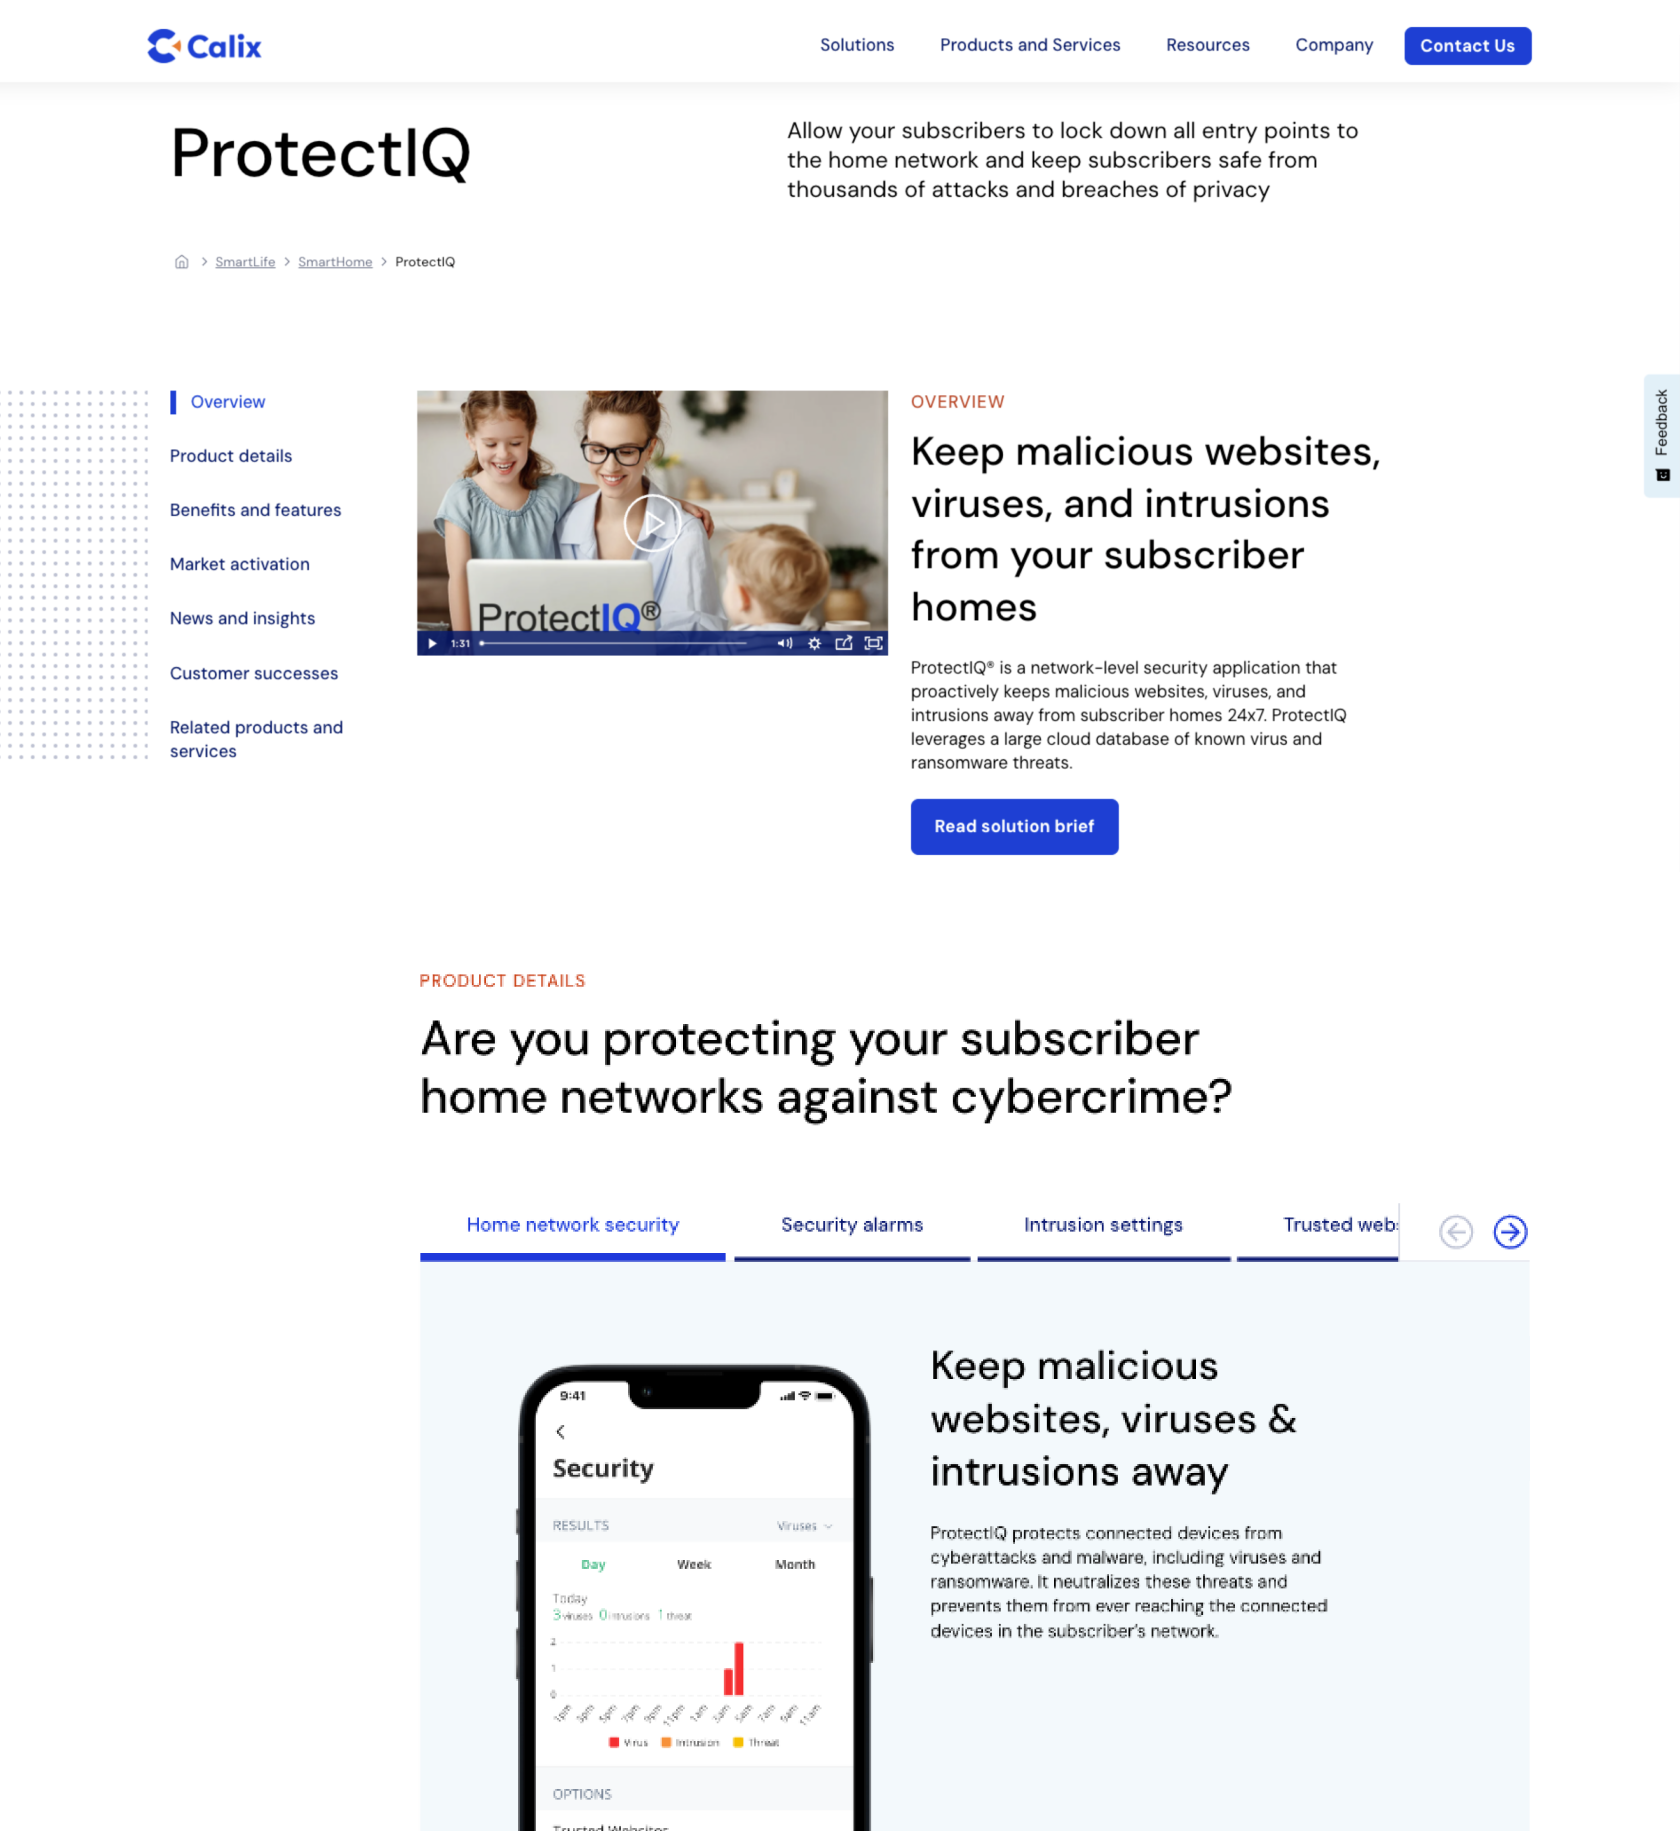 Screenshot of the ProtectIQ page from the Calix website.